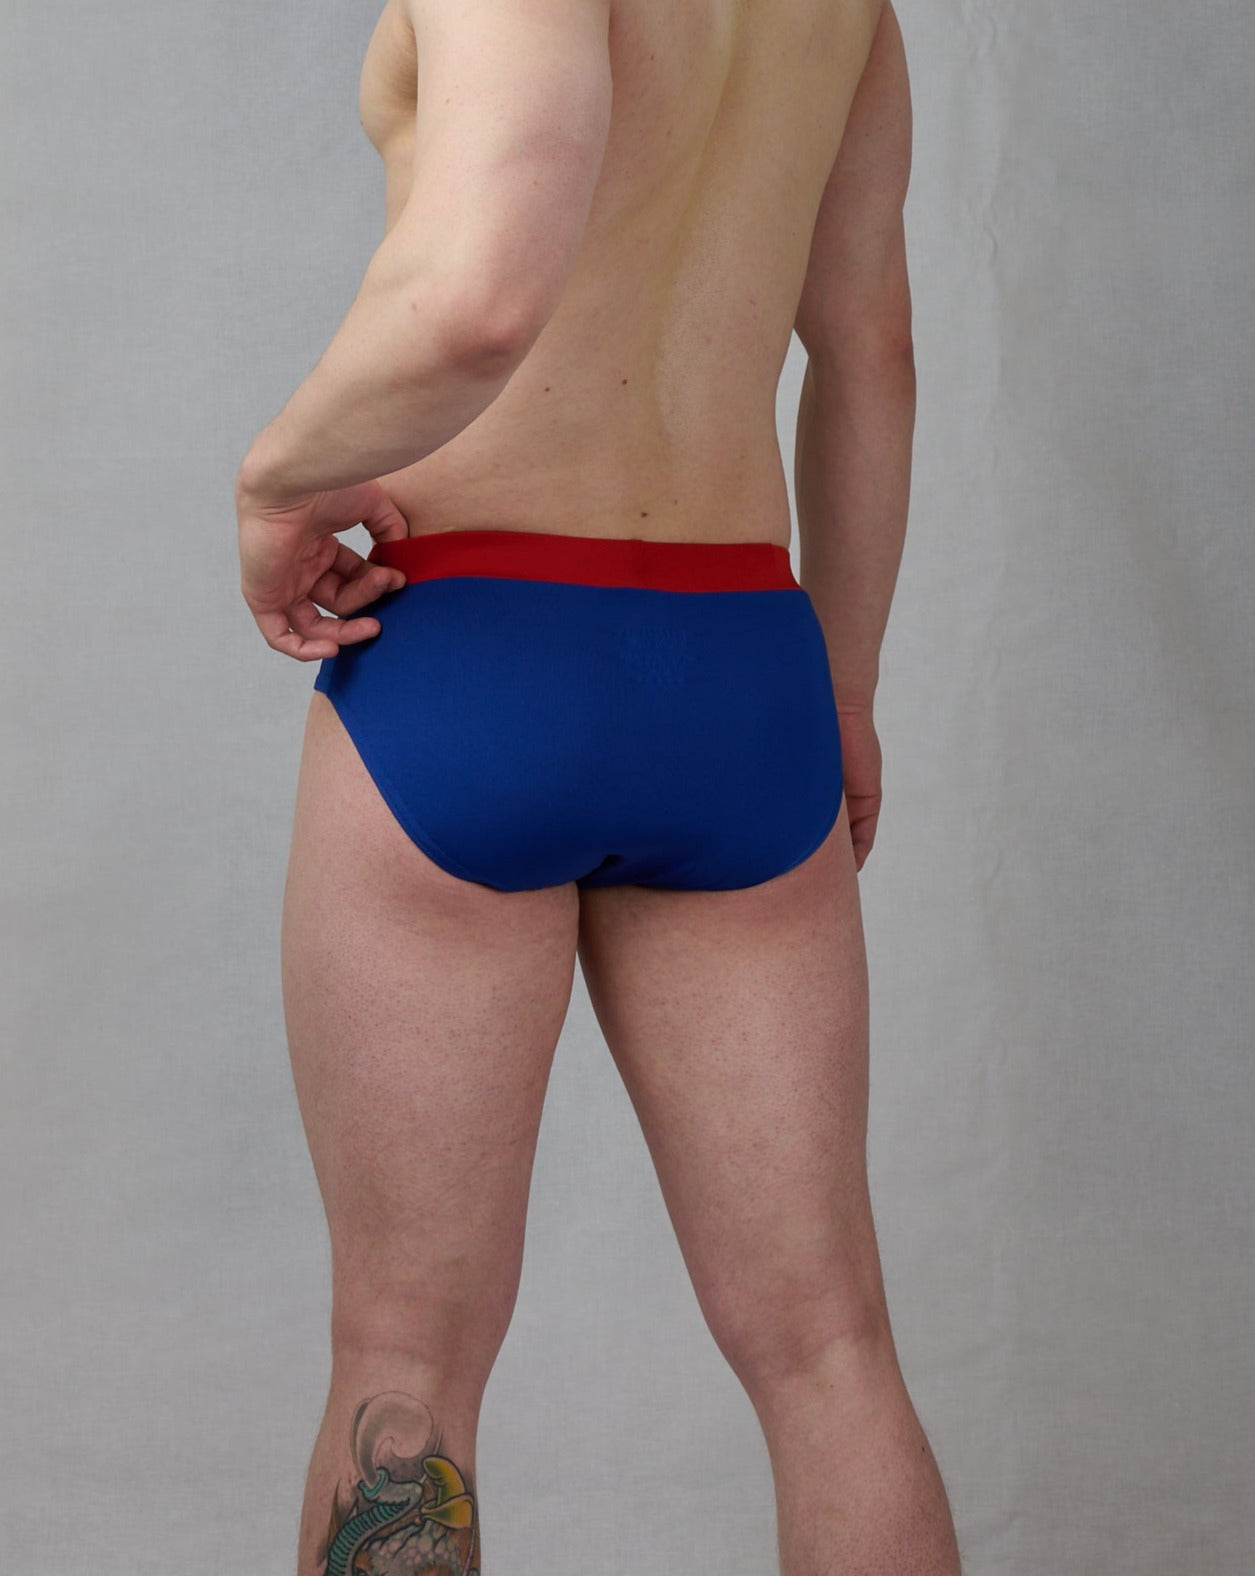 Swim speedos swimming trunks blue red with push up